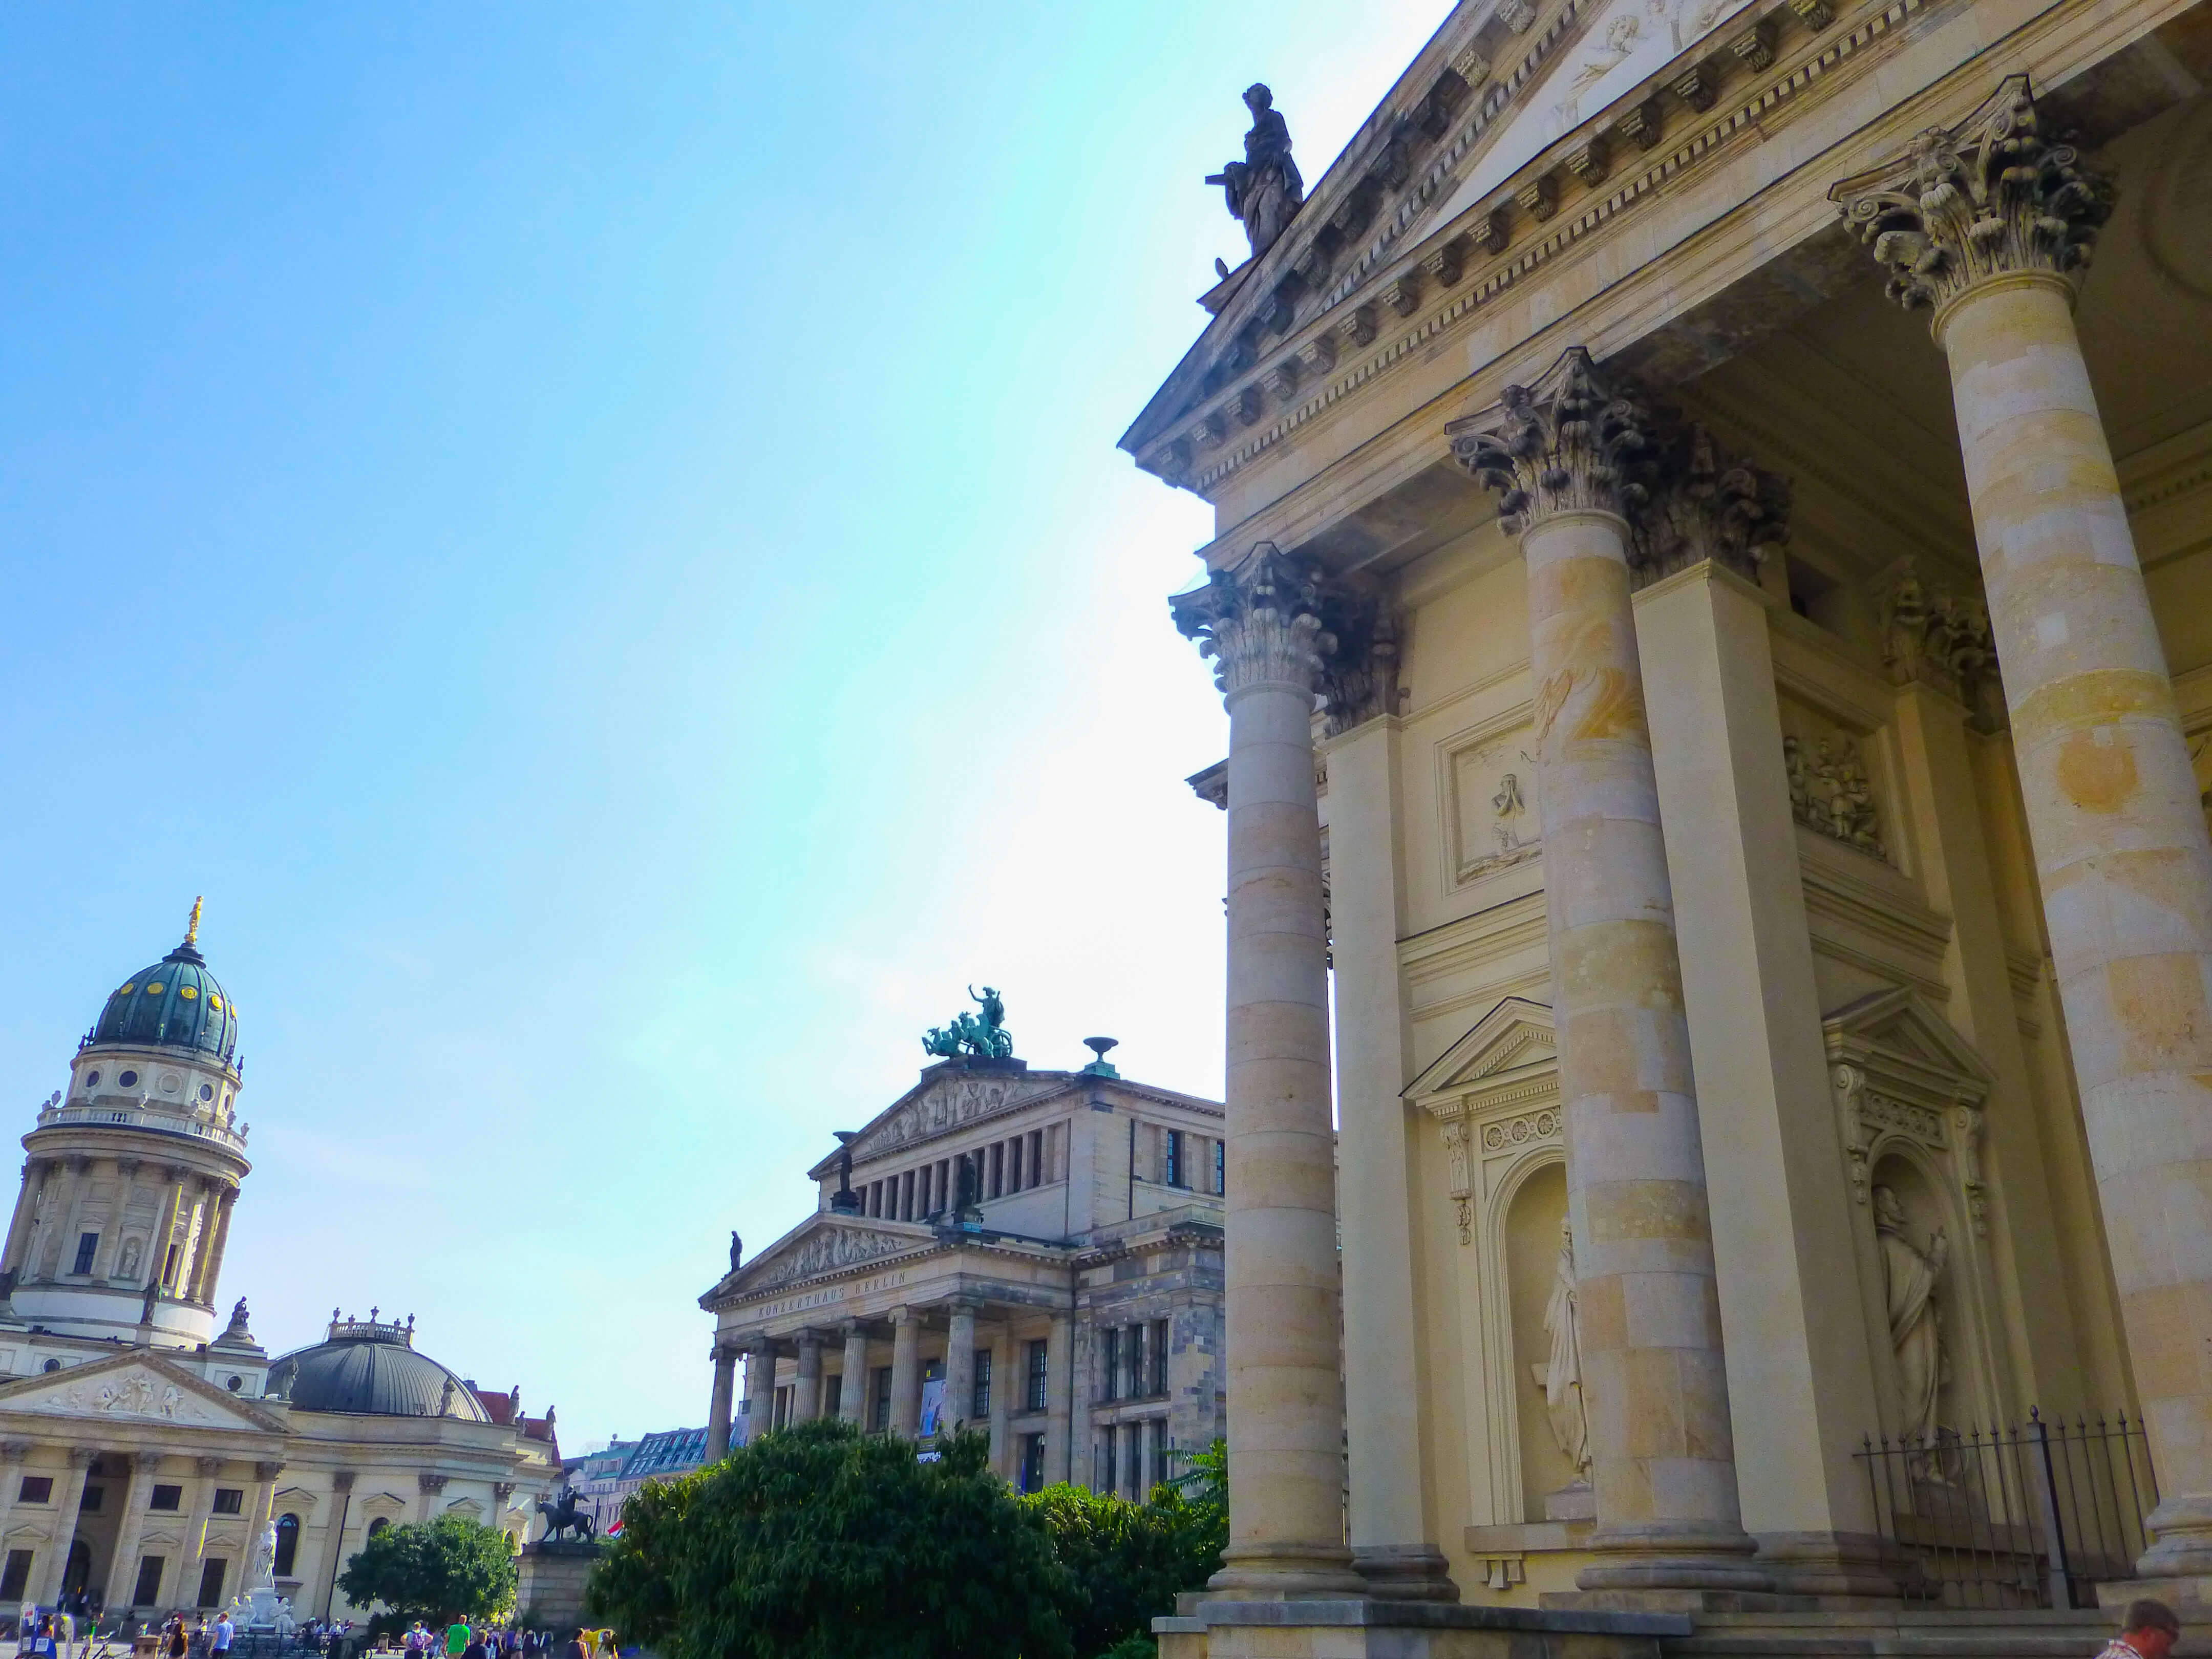 One Day in Berlin | Top Things to Do for an Unforgettable Day in Berlin